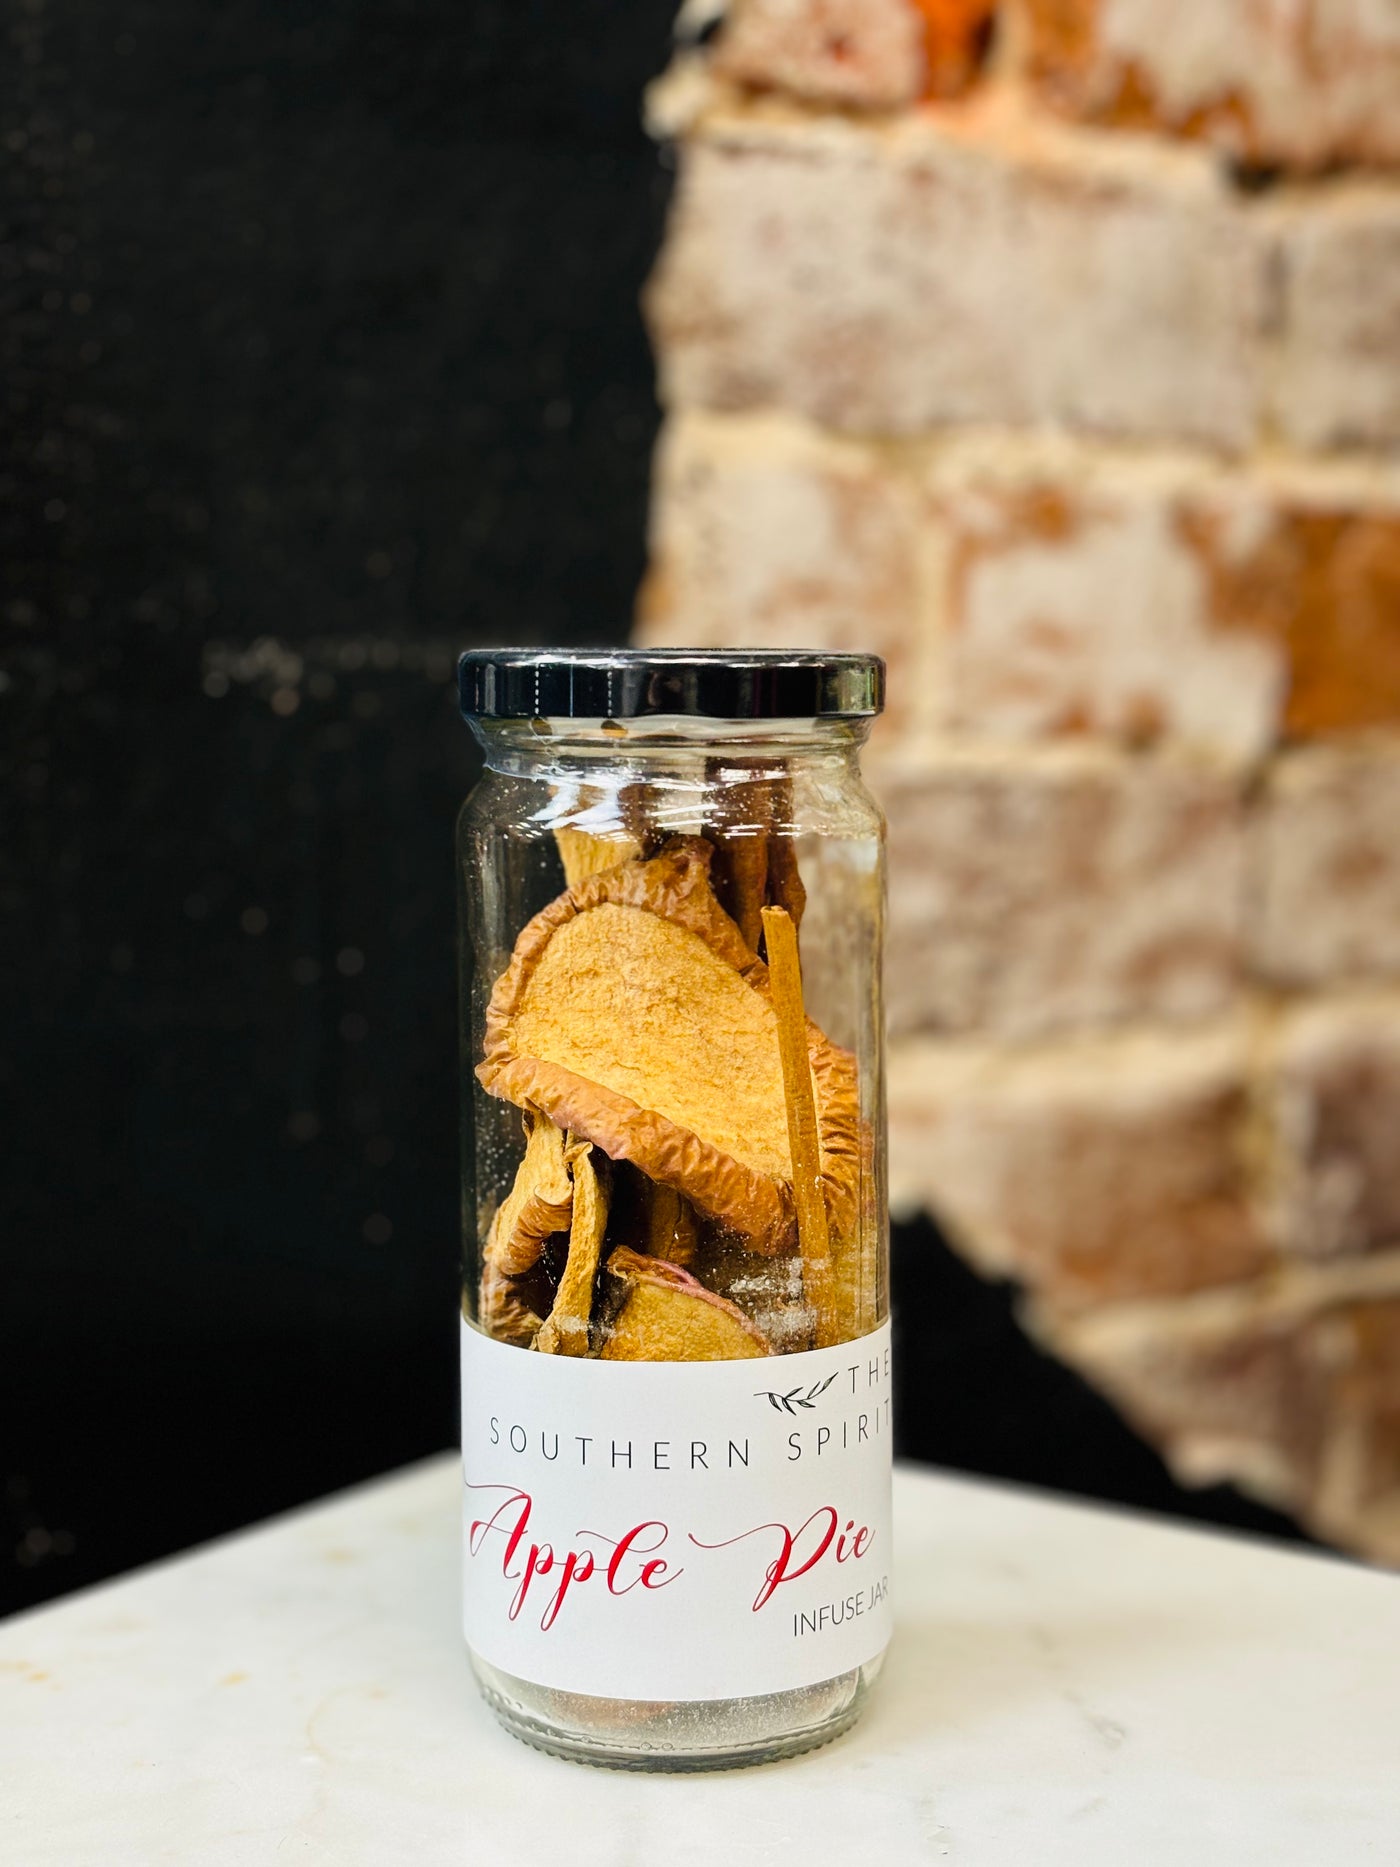 Apple Pie Cocktail Infuse Jar | The Southern Spirit